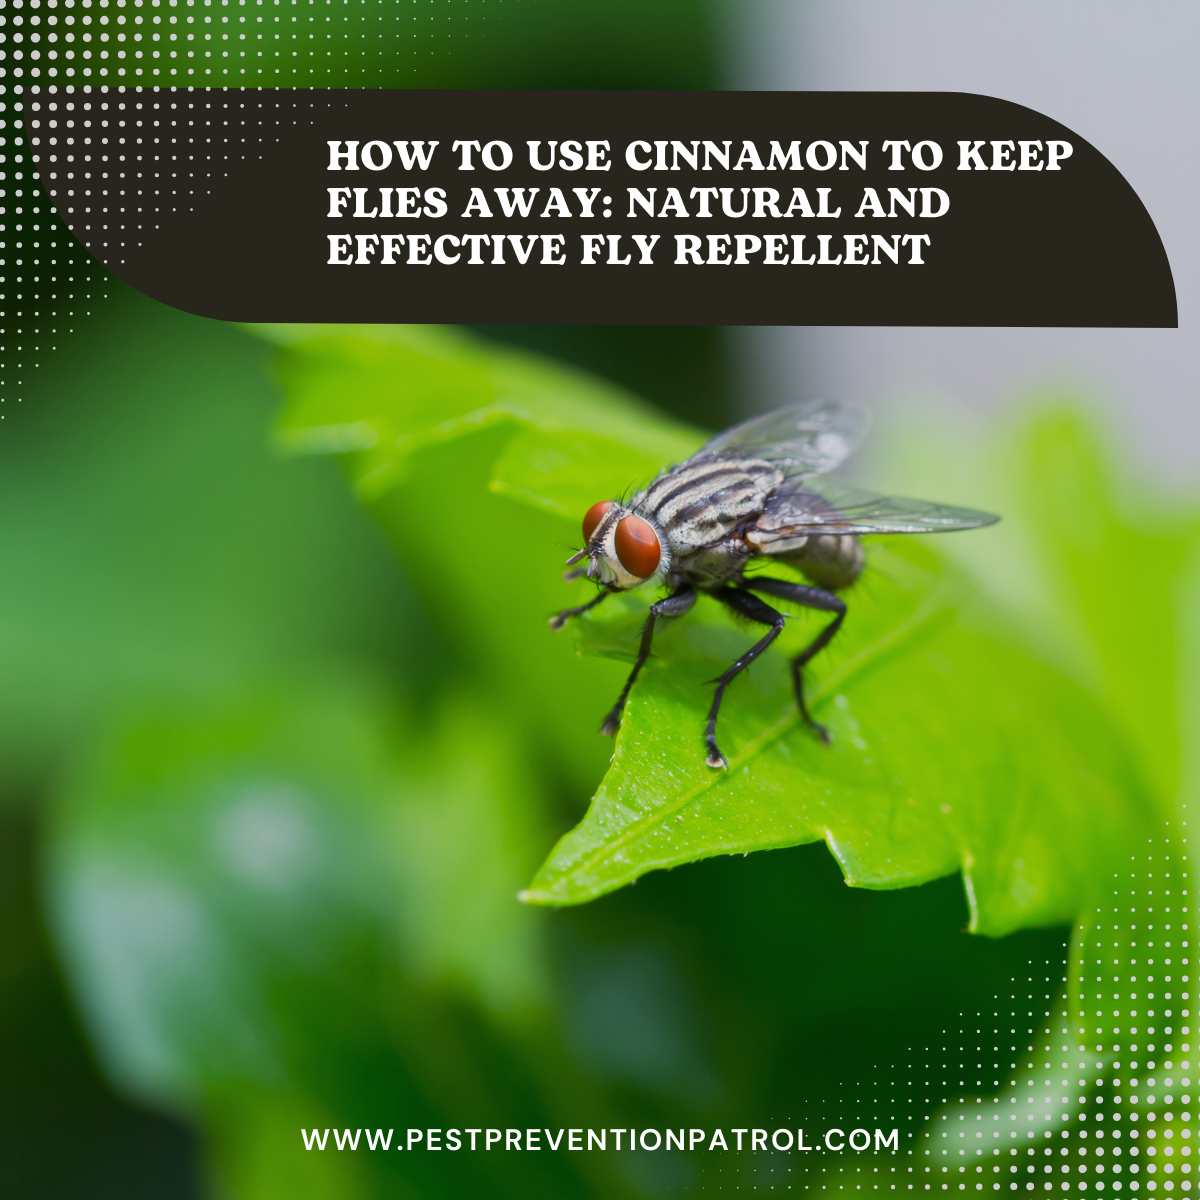 How to Use Cinnamon to Keep Flies Away_ Natural and Effective Fly Repellent